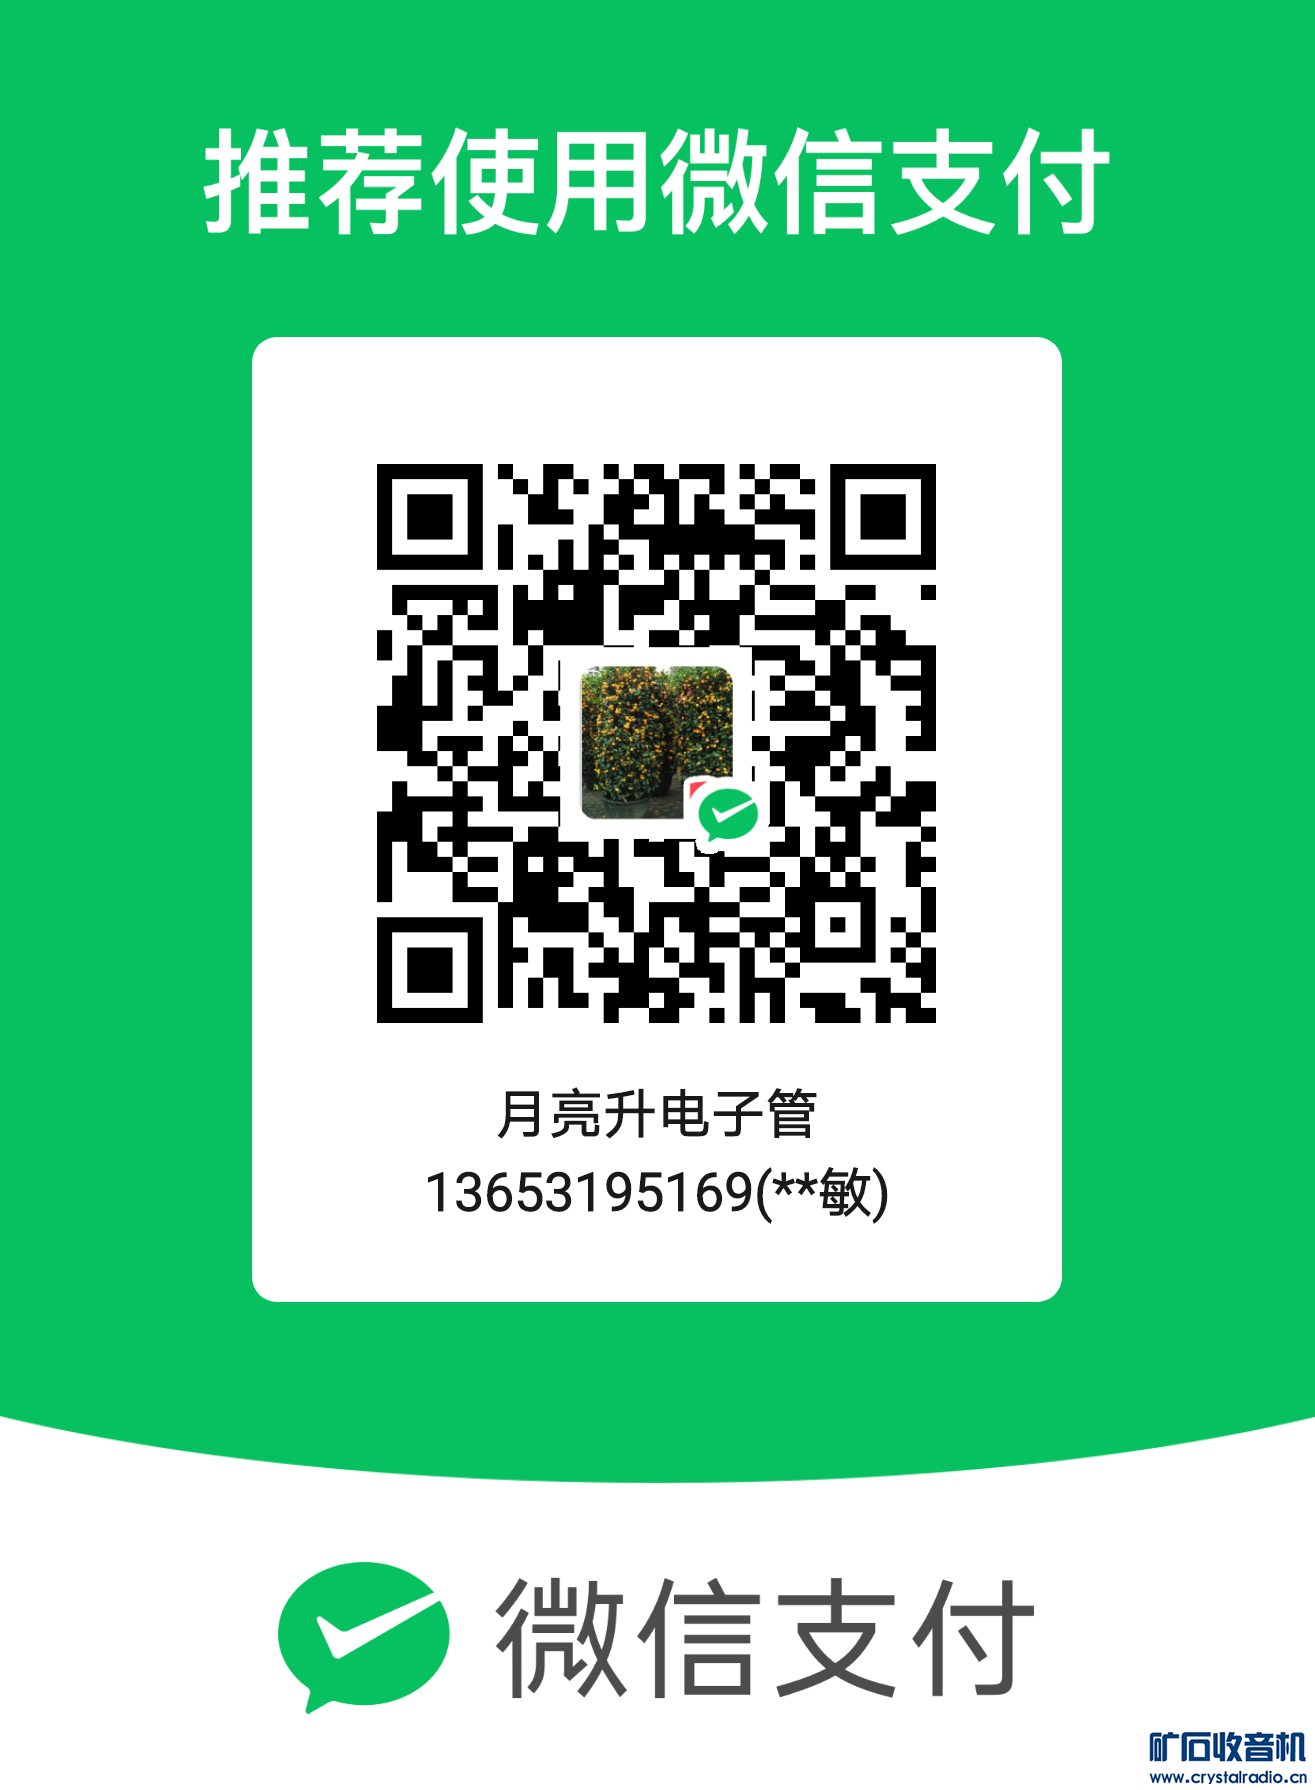 mm_facetoface_collect_qrcode_1654698766773.png